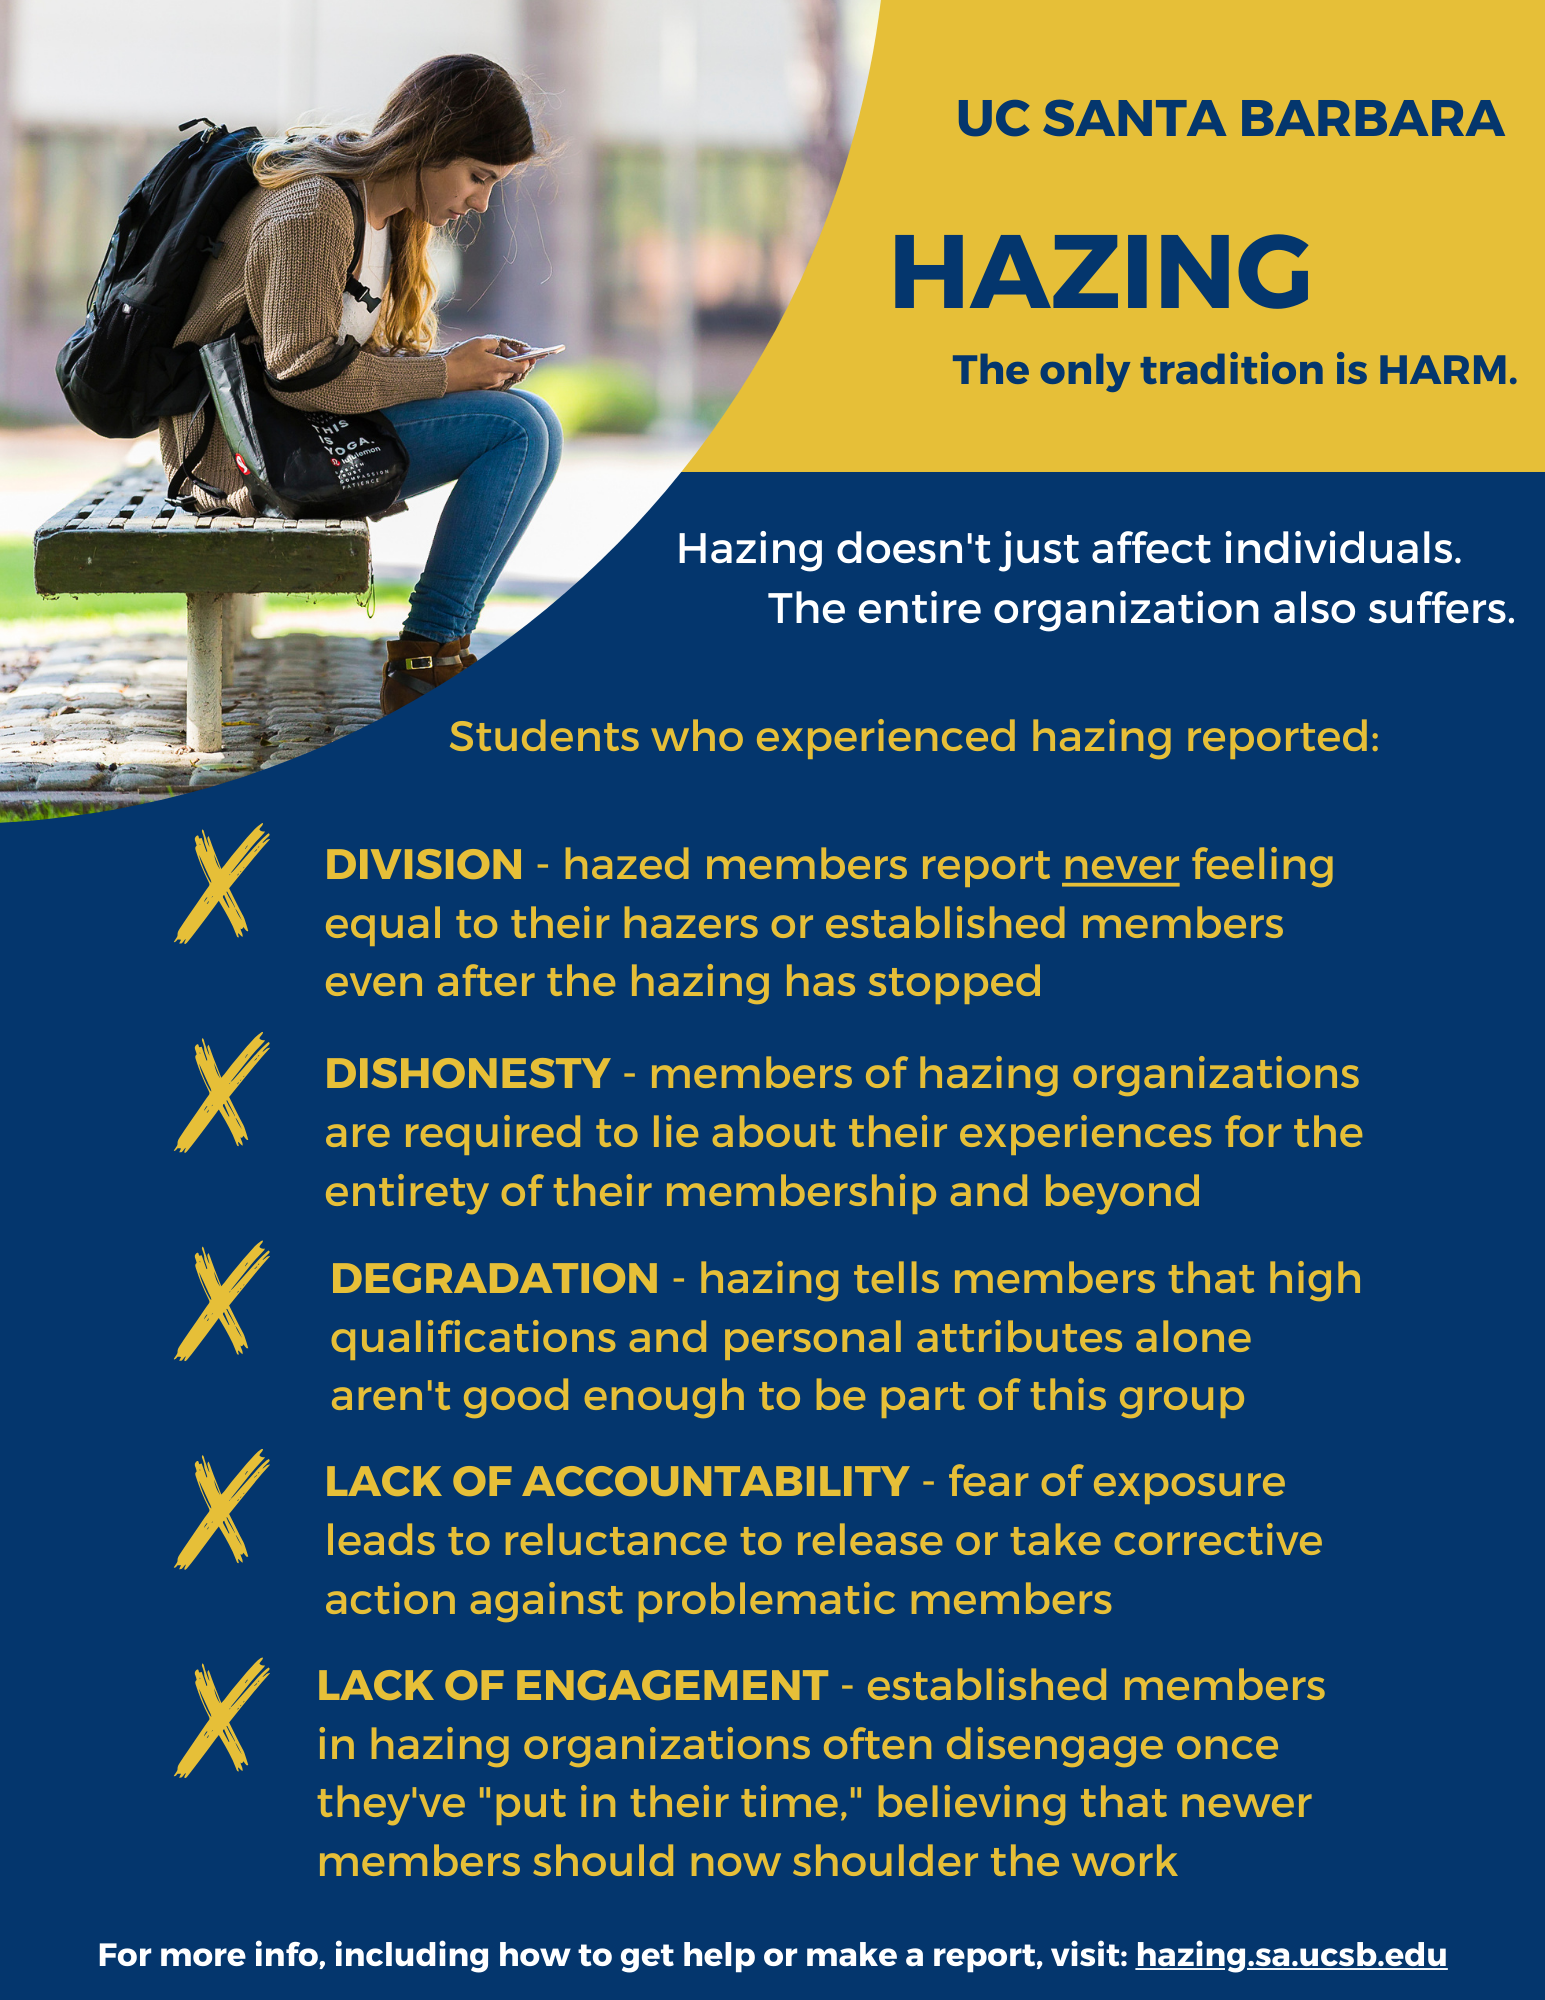 A handout titled Hazing: The only tradition is Harm